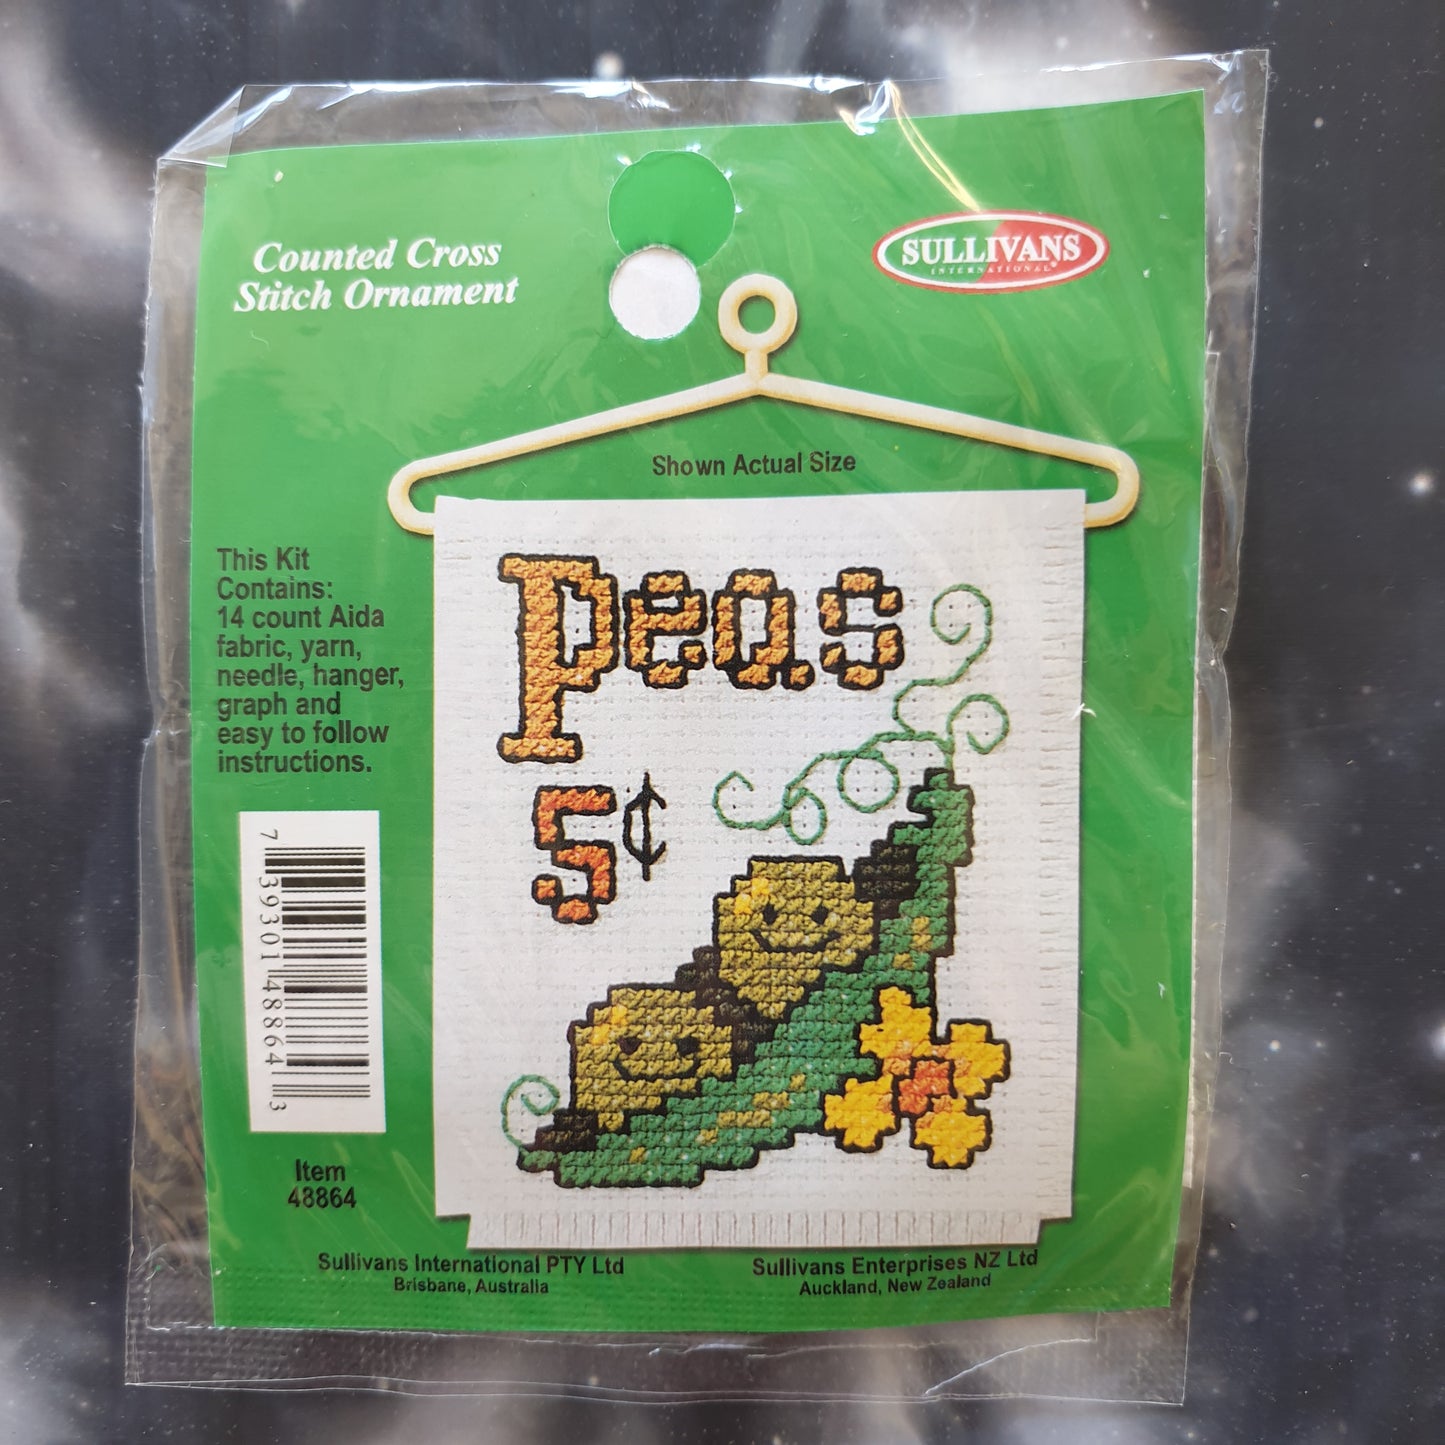 Peas 5c Counted Cross Stitch Ornament Kit